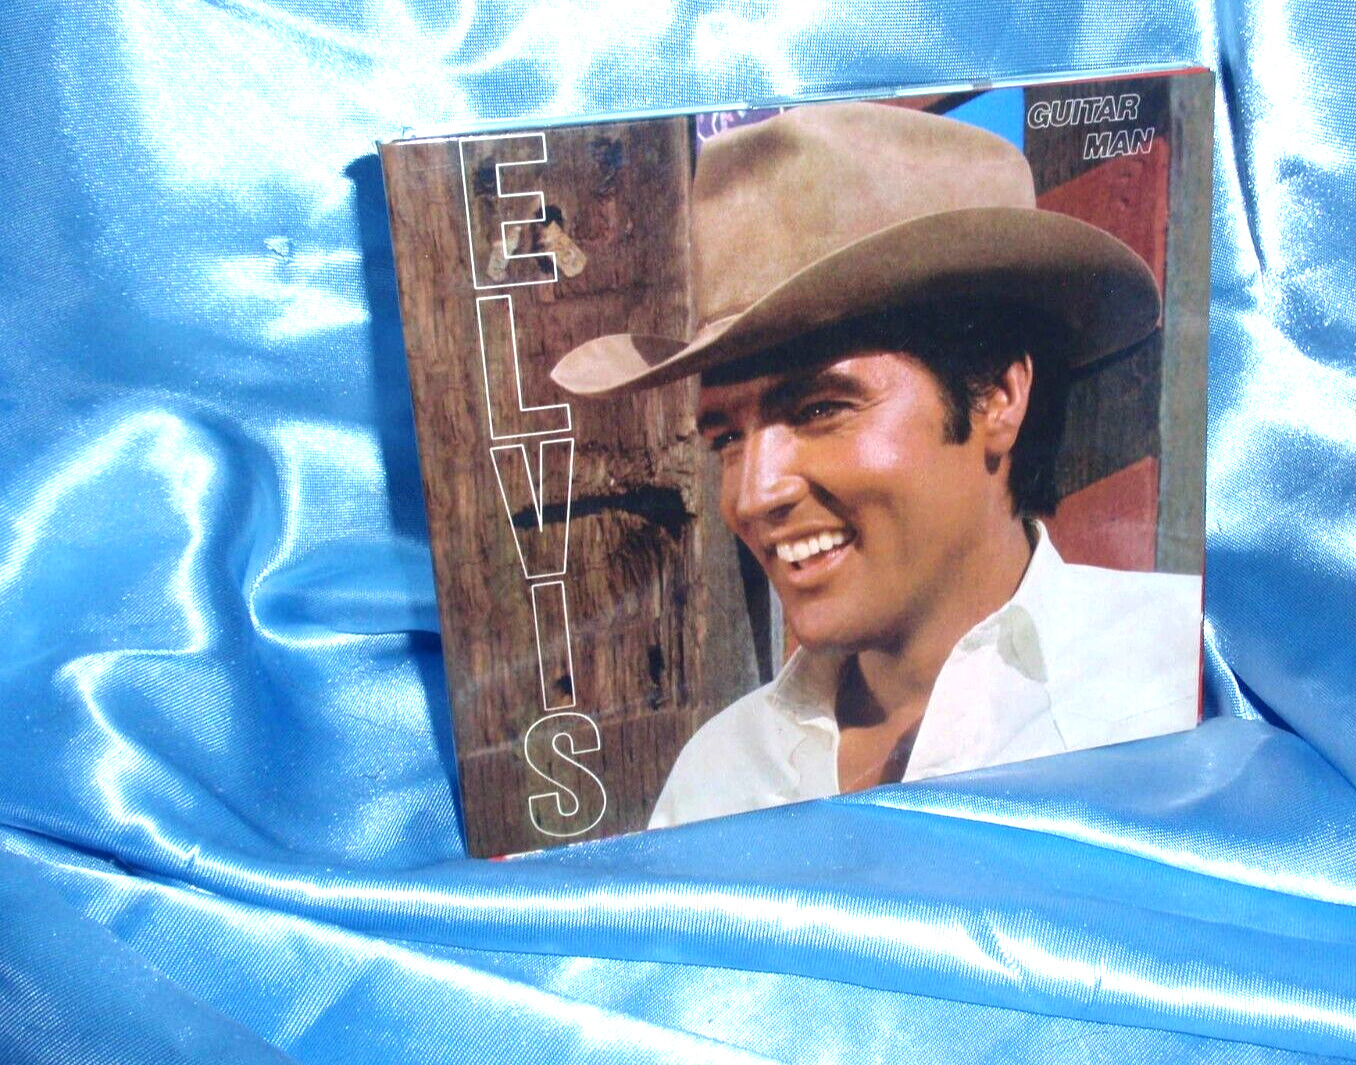 ELVIS Guitar Man RARE 81\' Remix Songs &I WAS THE ONE 2 CD Set Many unheard songs